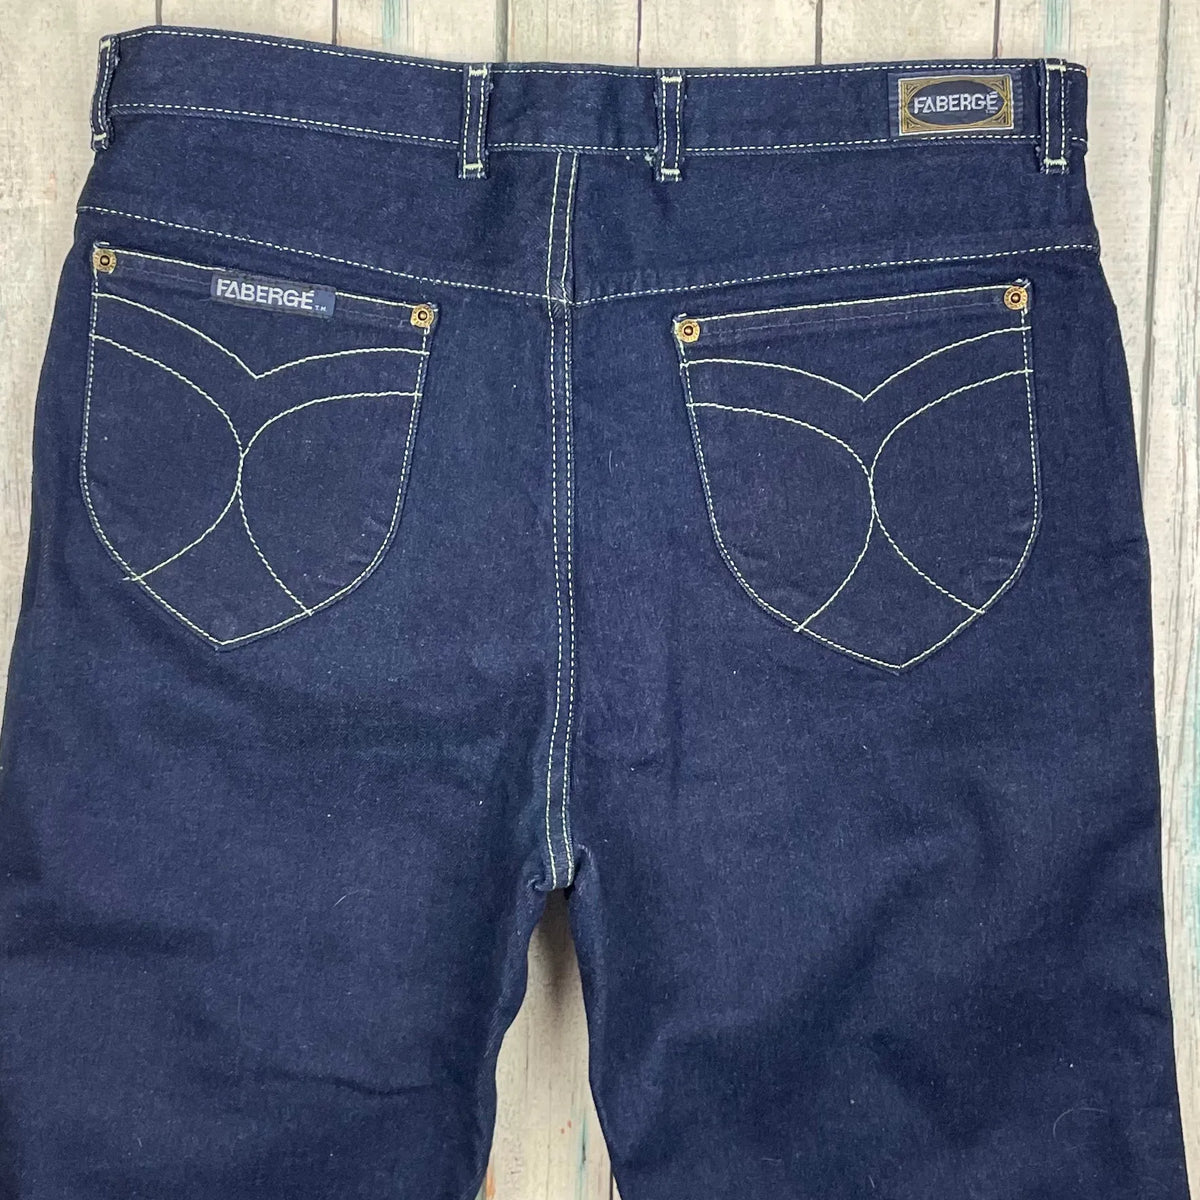 NEW- Fabergé Stretchies 1980's Mens Jeans - Hard to find!- Size 34 ...